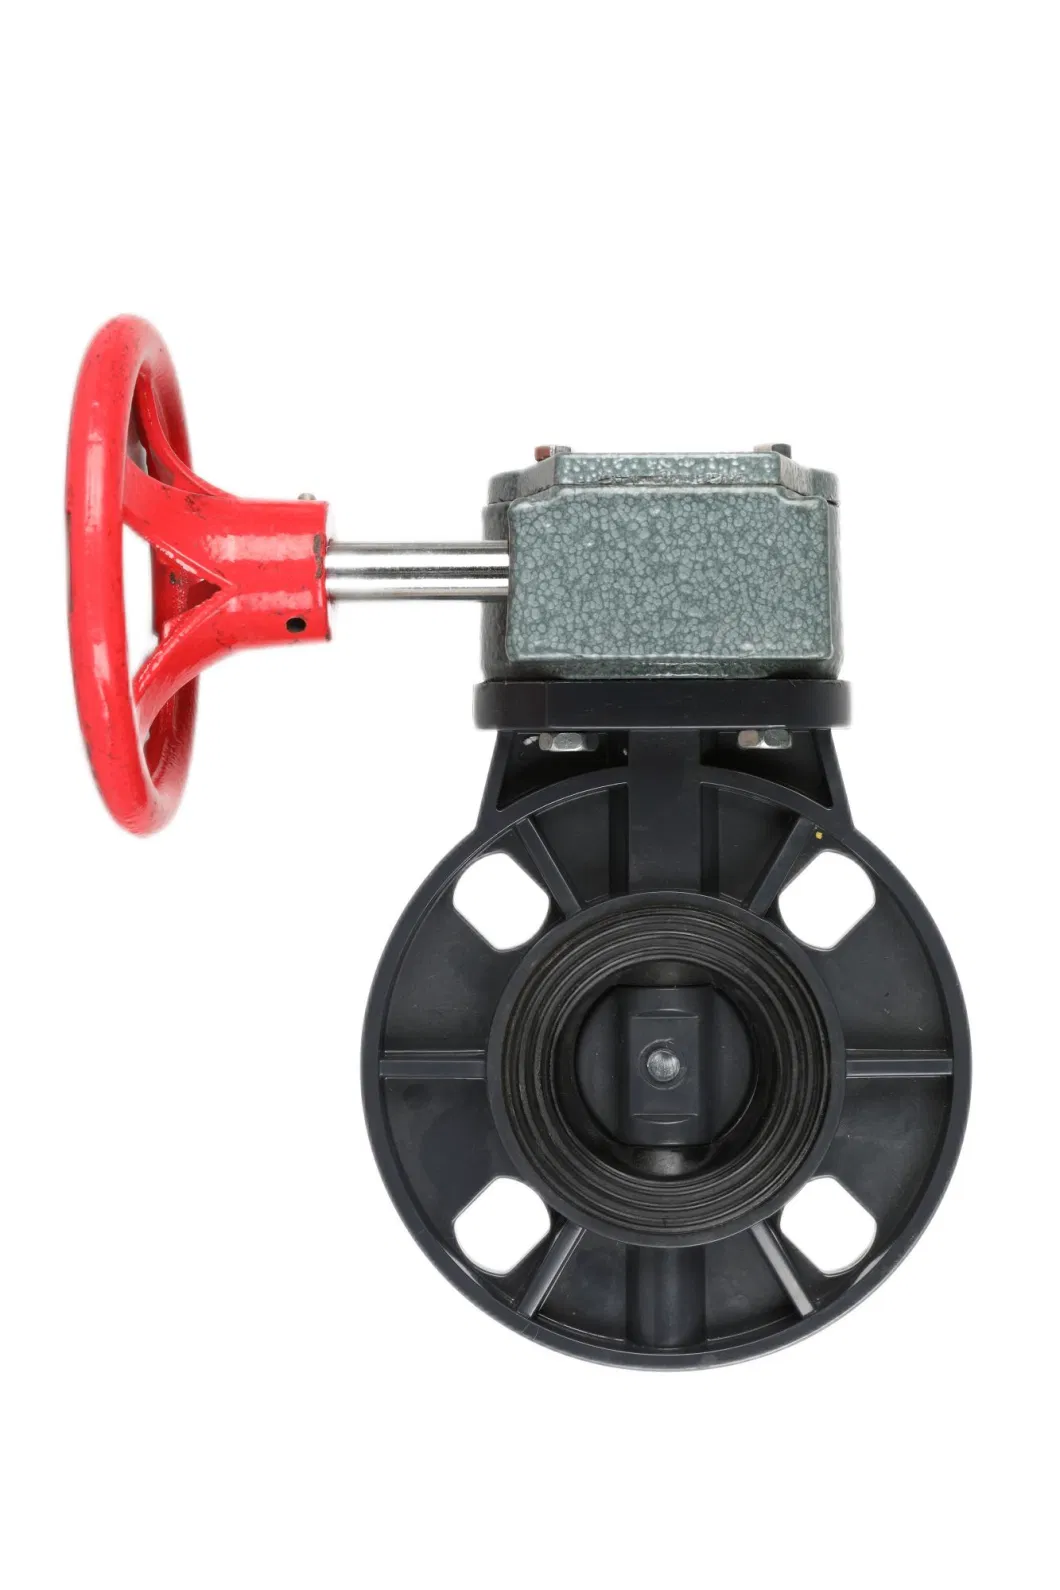 PVC Gear Box Butterfly Valve Ductile Cast Iron Stainless Steel Barss Water DIN Manual/Actuator Wafer Lug Type